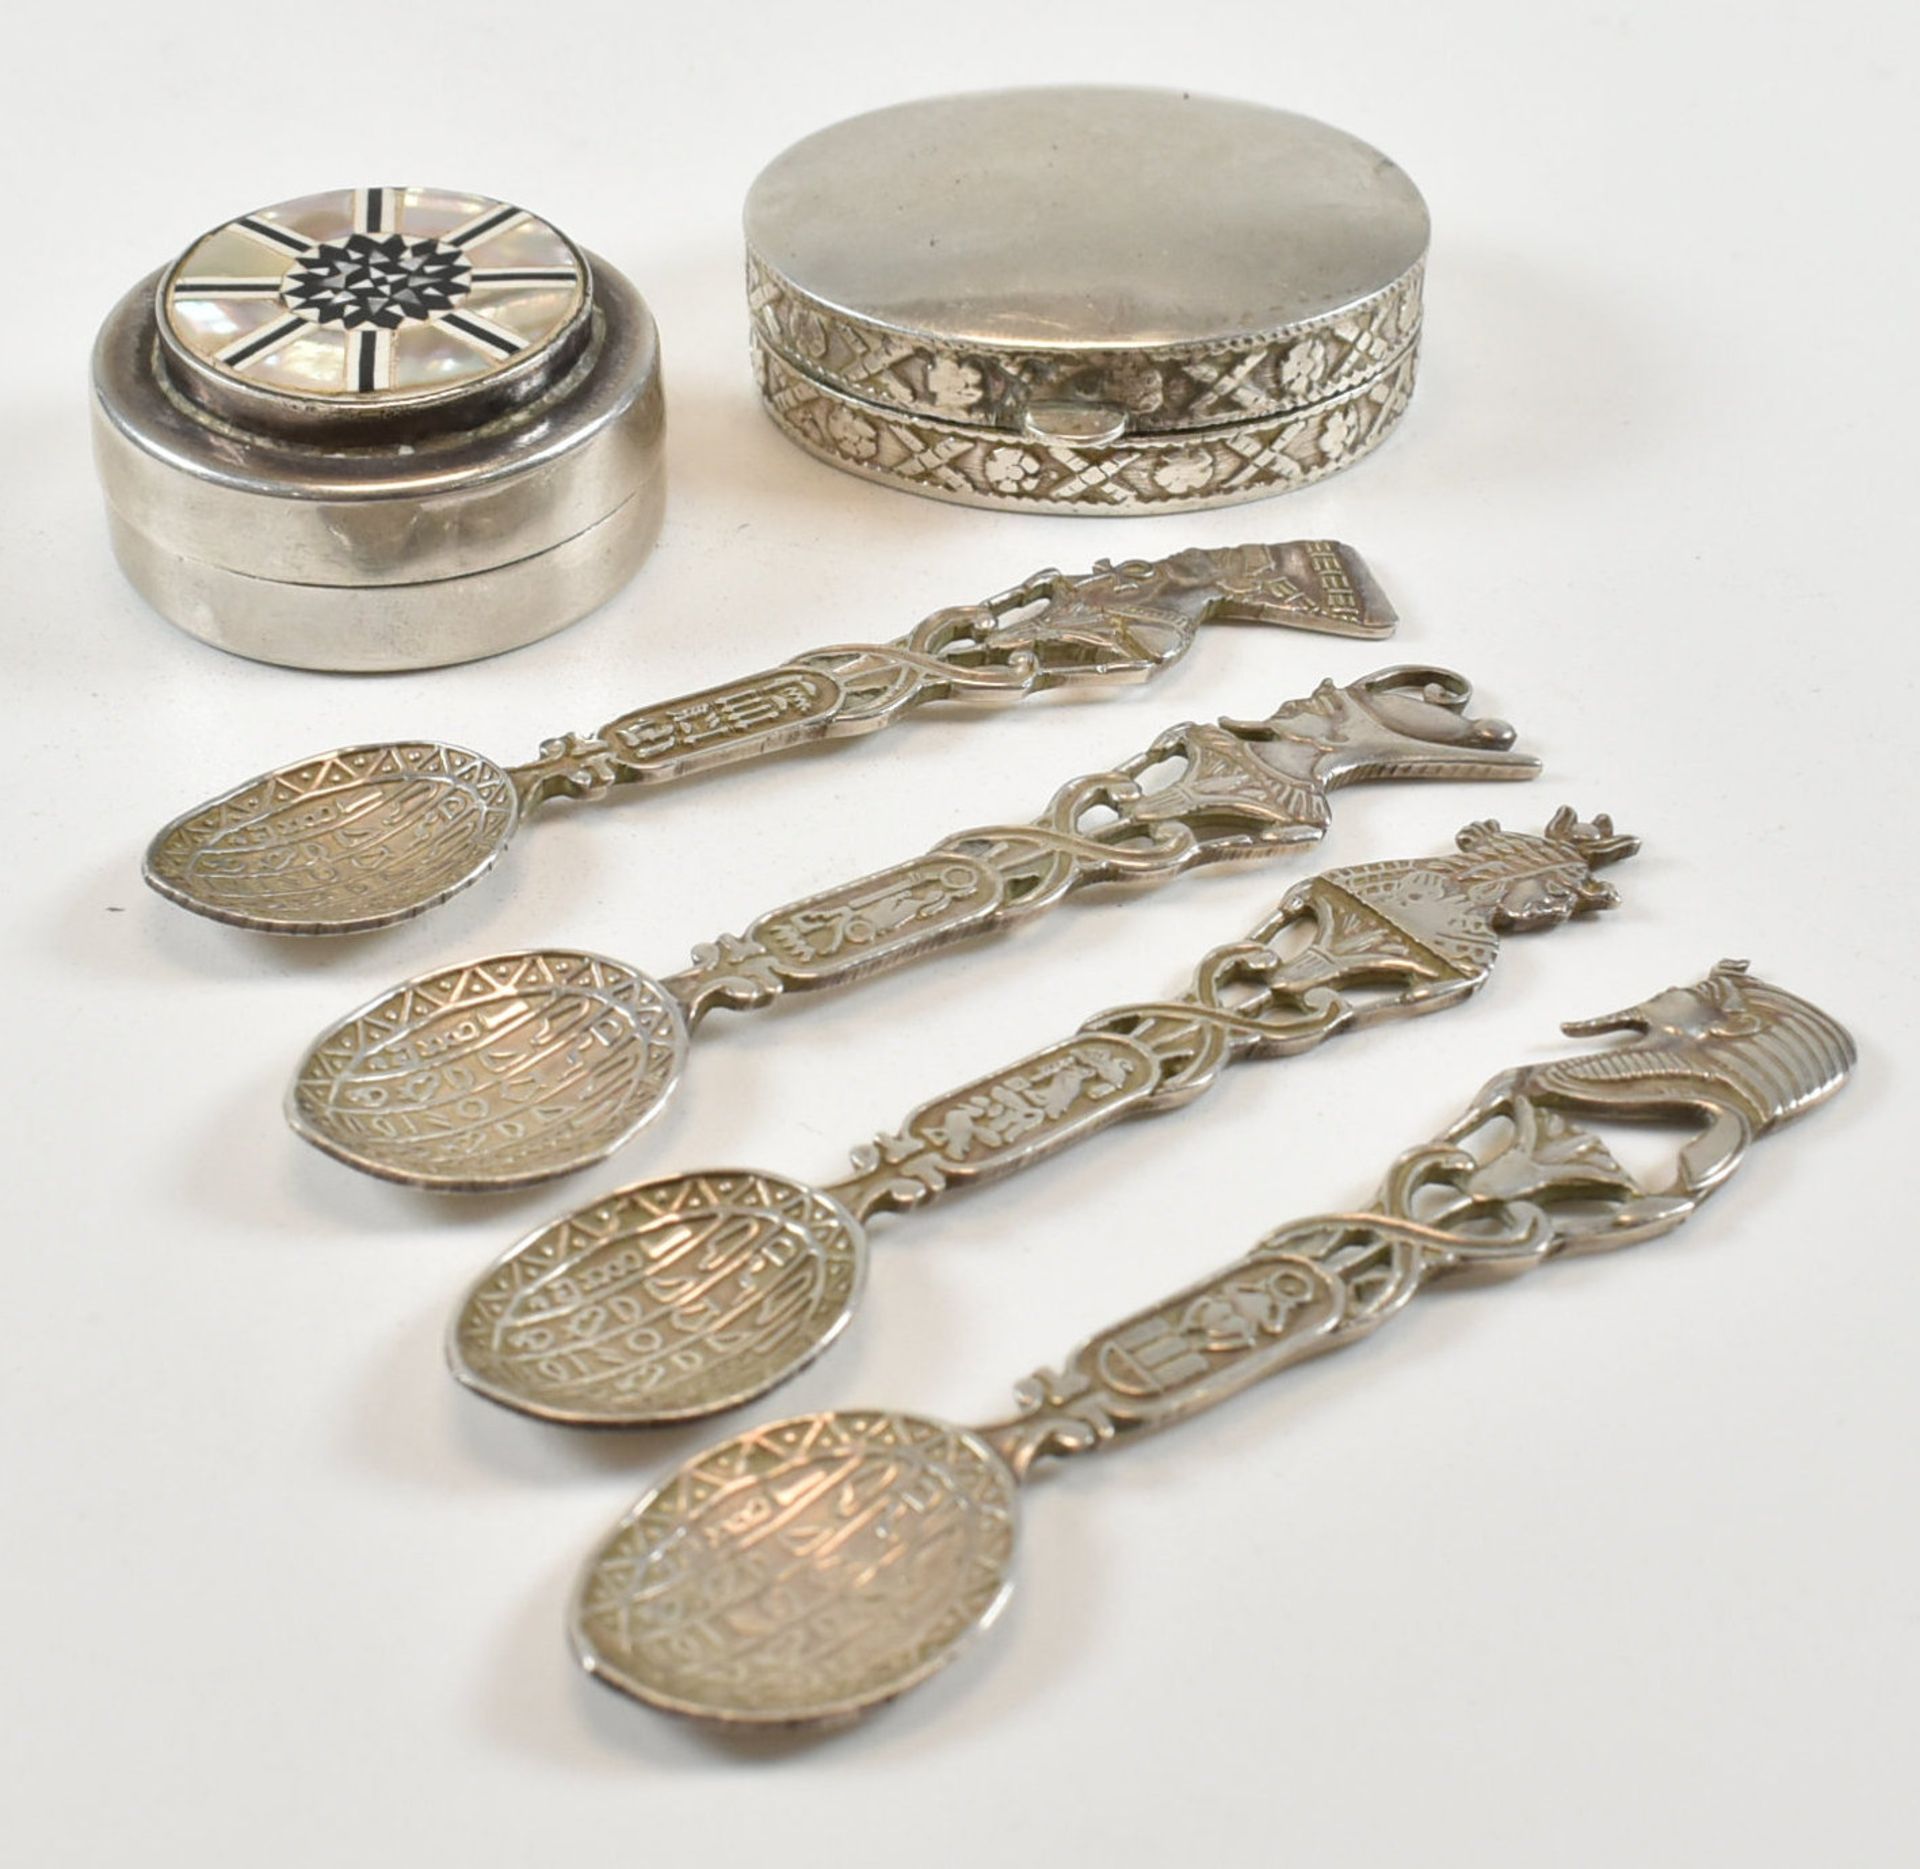 COLLECTION OF 20TH CENTURY MIDDLE EASTERN SILVER